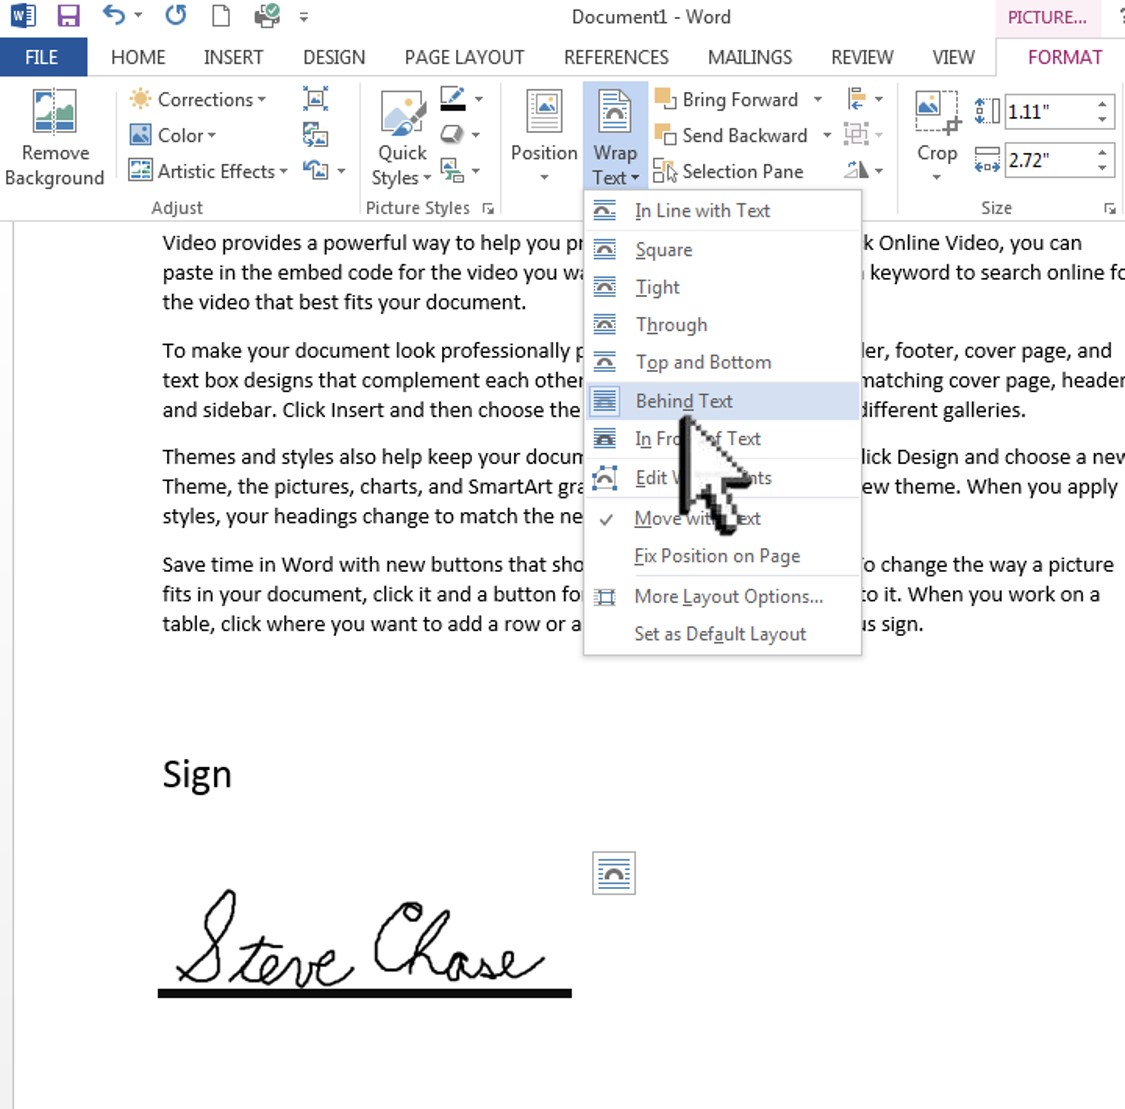 How To Sign In On Word